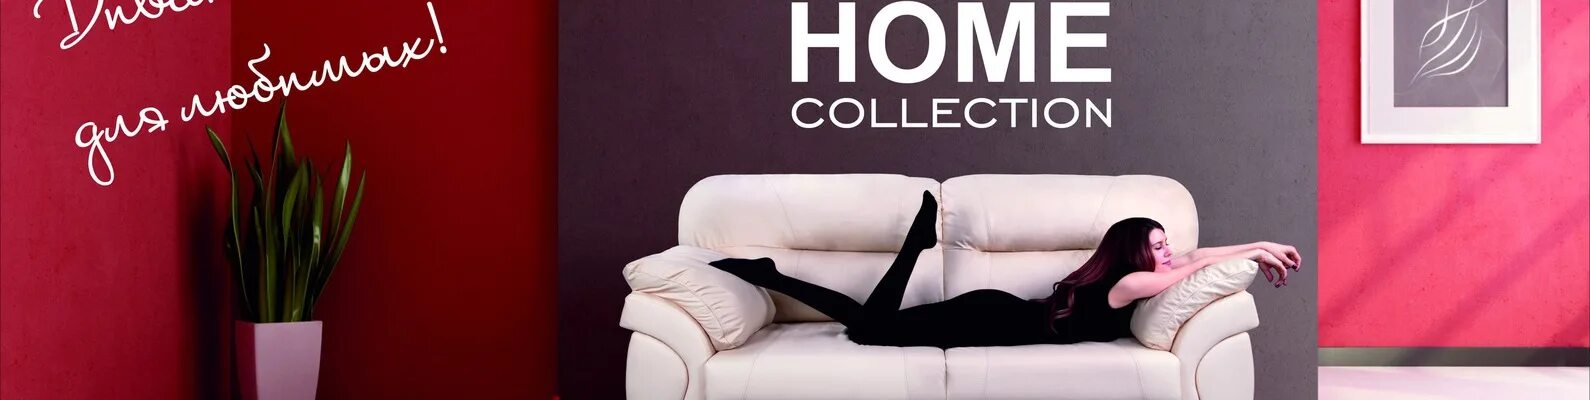 Home collection купить. Home collection реклама. Home collection логотип. Home collection Орел. Фабрика мягкой мебели Home collection.